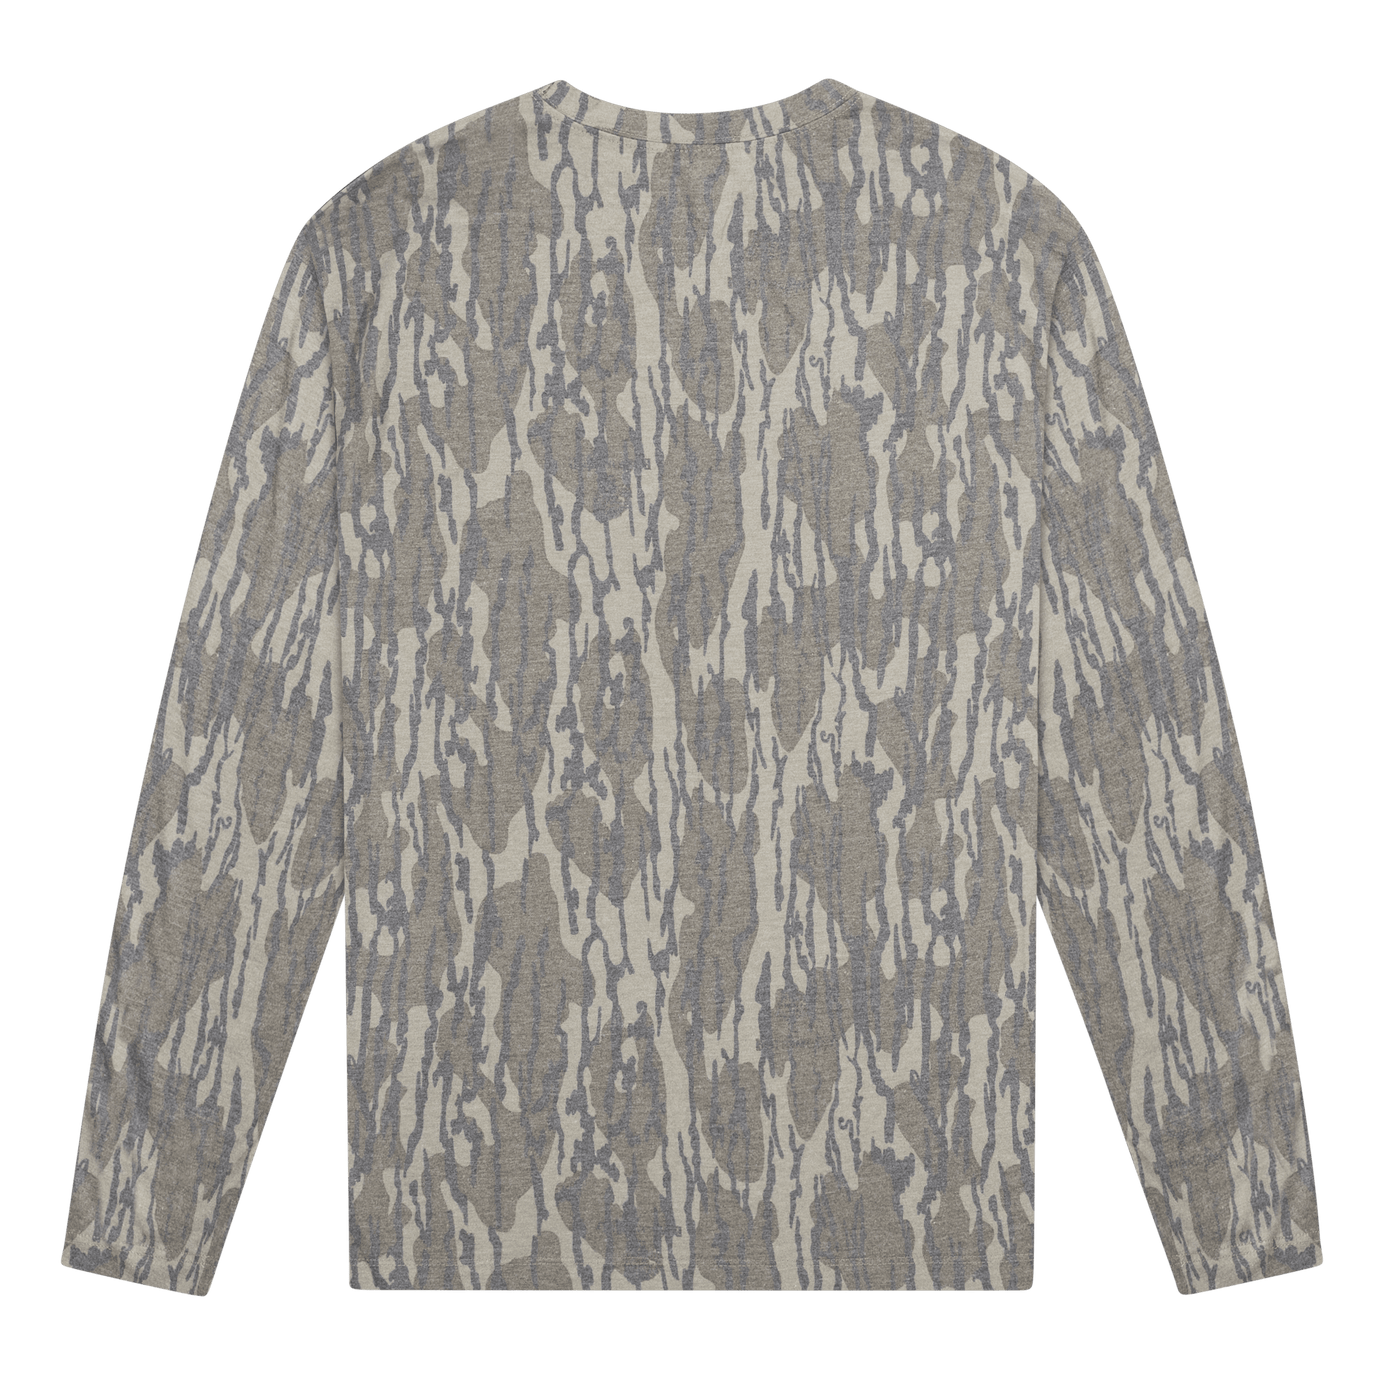 Mossy Oak Washed Out Long Sleeve Tee